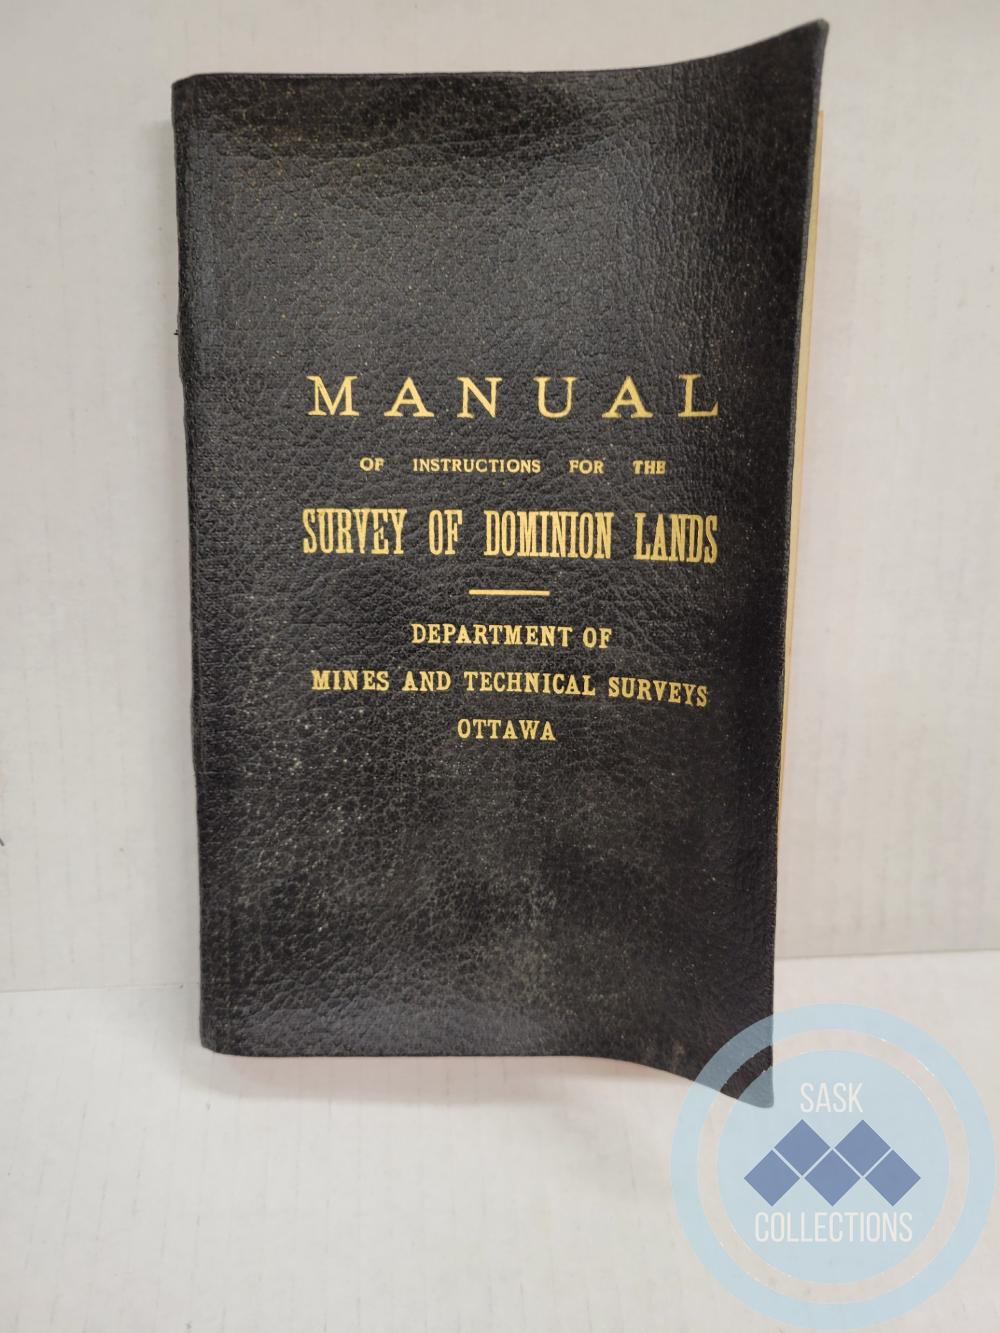 Manual of Instructions for the Survey of Dominion Lands - Department of Mines and Technical Surveys, Ottawa